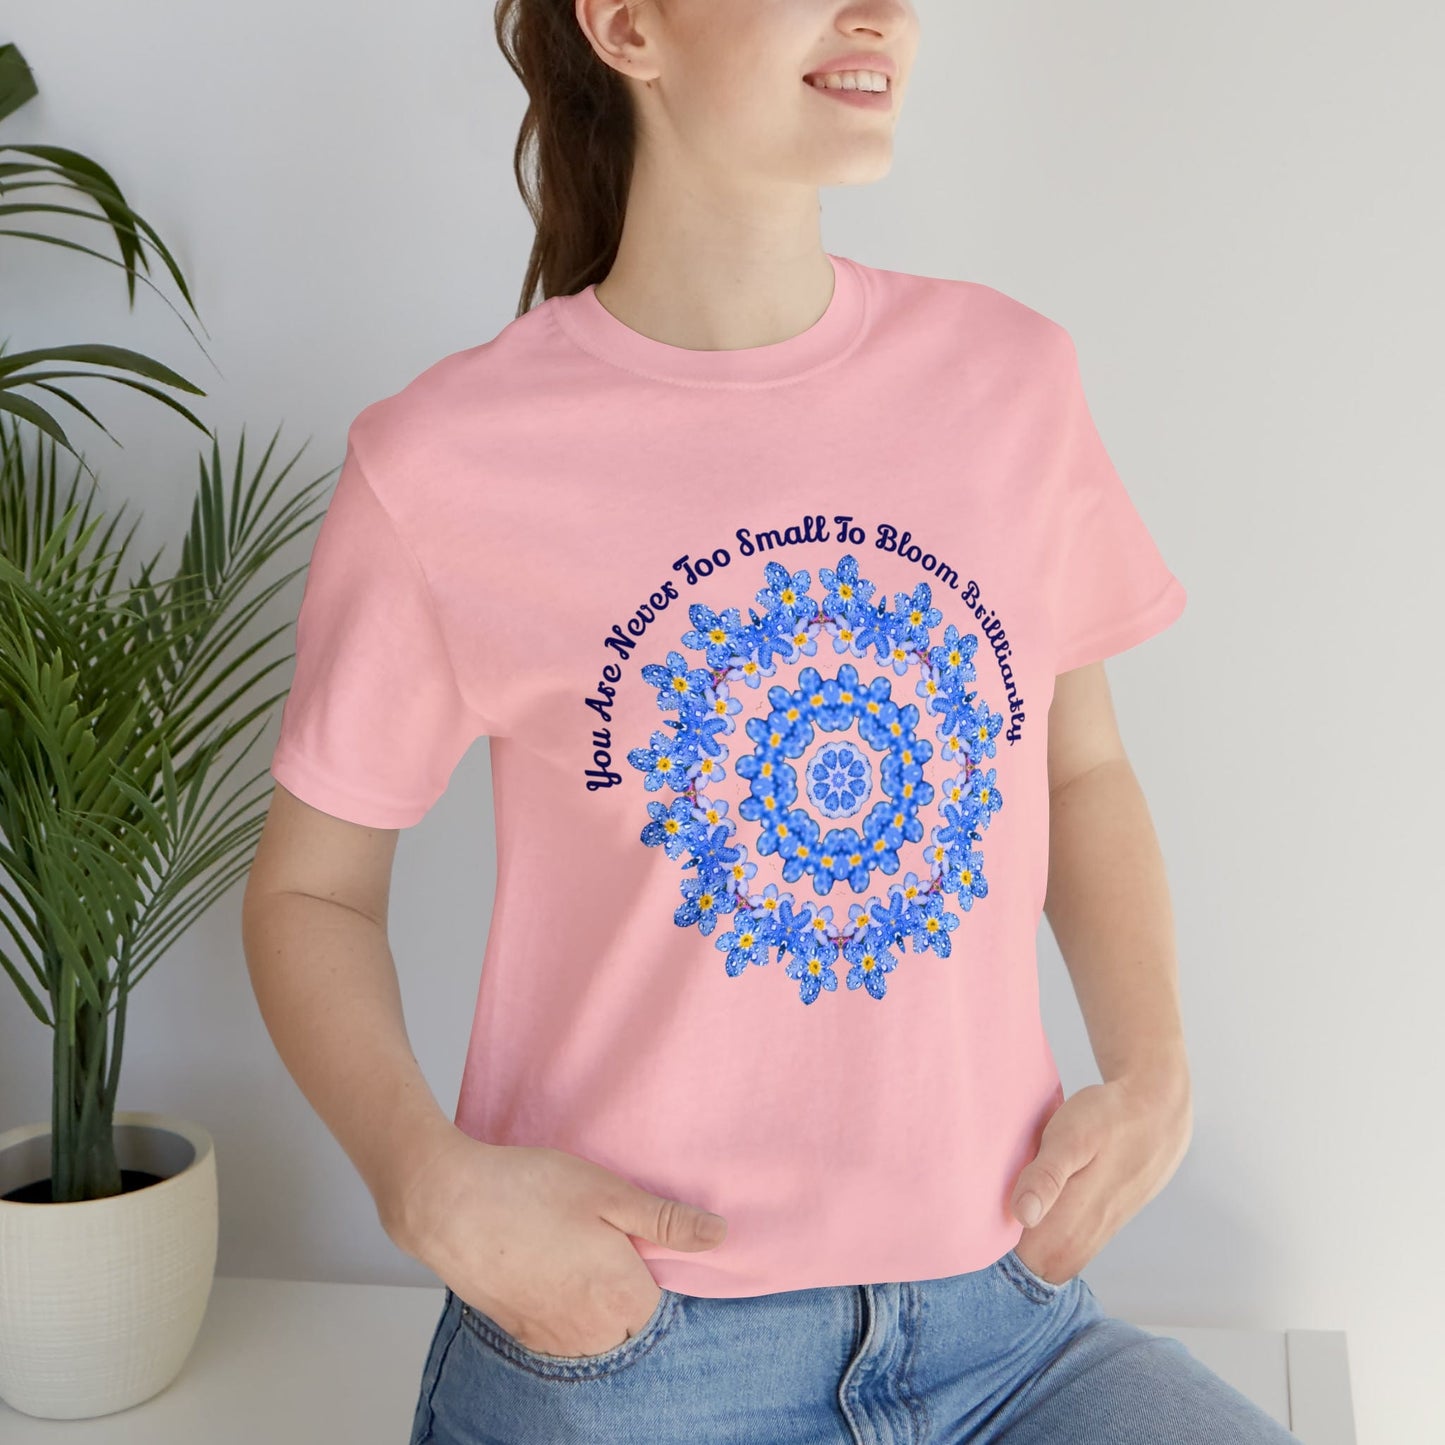 Forget Me Not Wild Flower Shirt, Best Selling Shirts With Positive, Kawaii, Cottage Core, Kindness Motivational Poet Quote, Exclusive Design